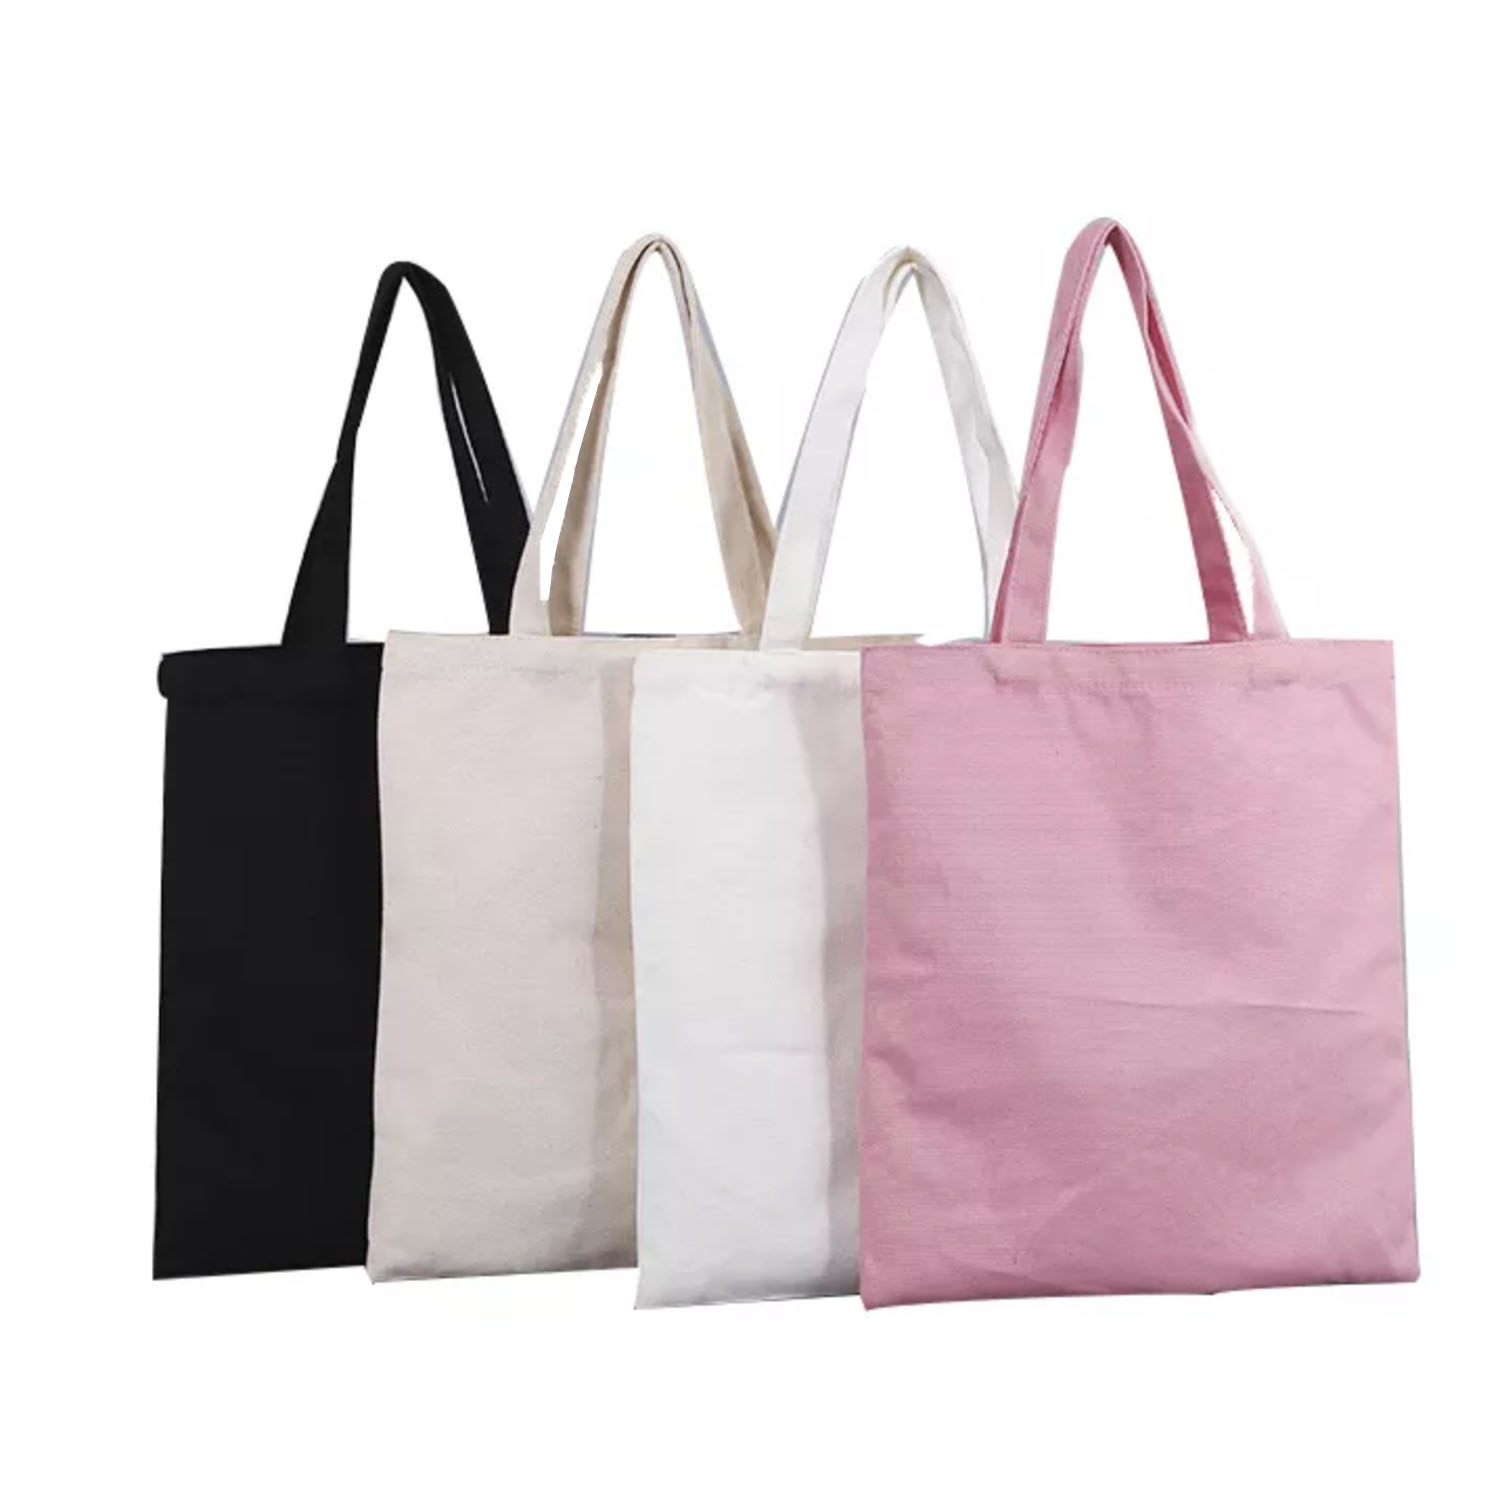 BLANK TOTE BAG, White Tote Bag, Blank Tote Bags for Sublimation